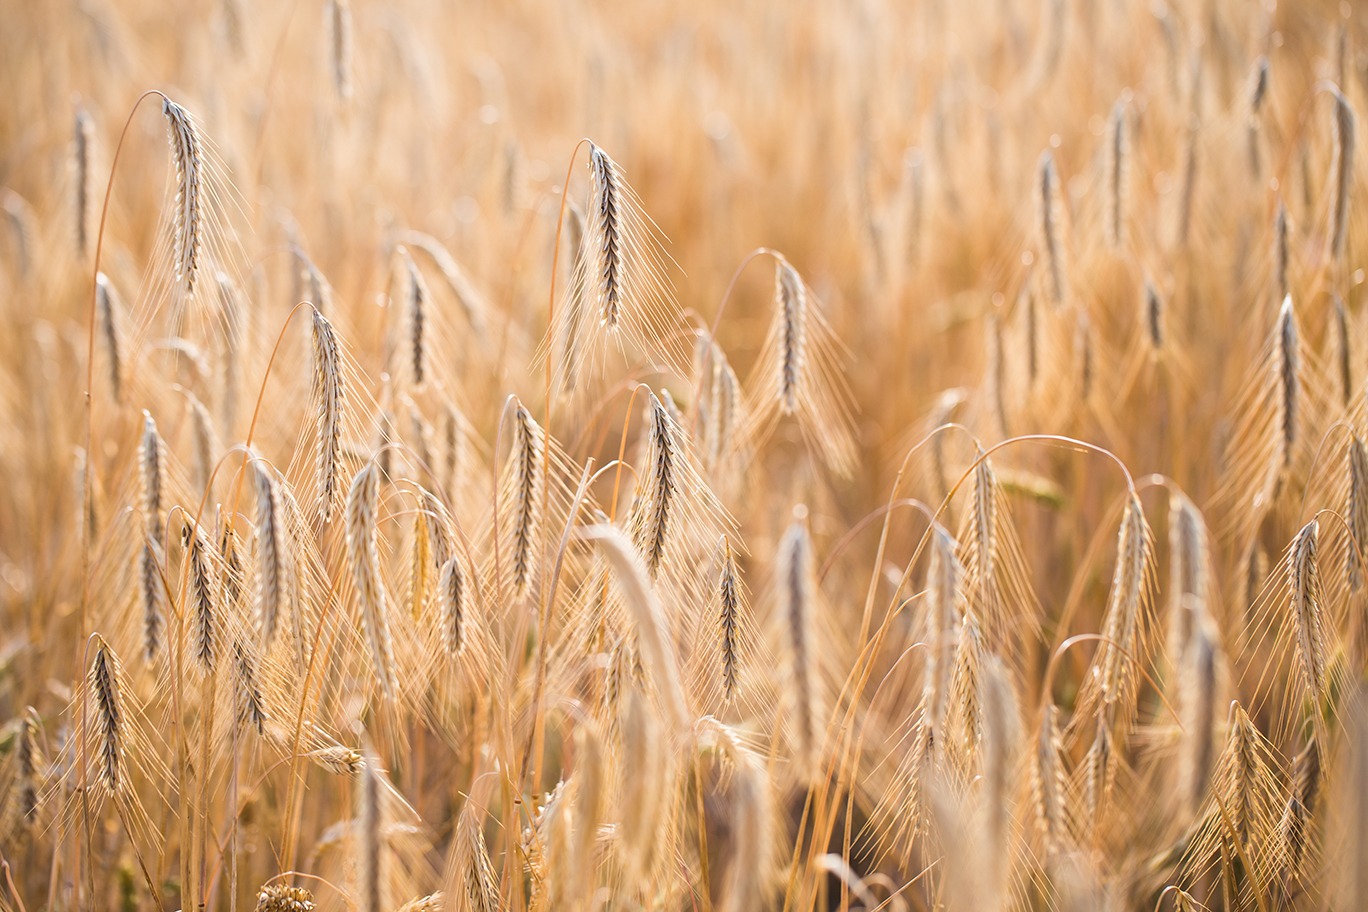 Story about wheat market in the Palouse